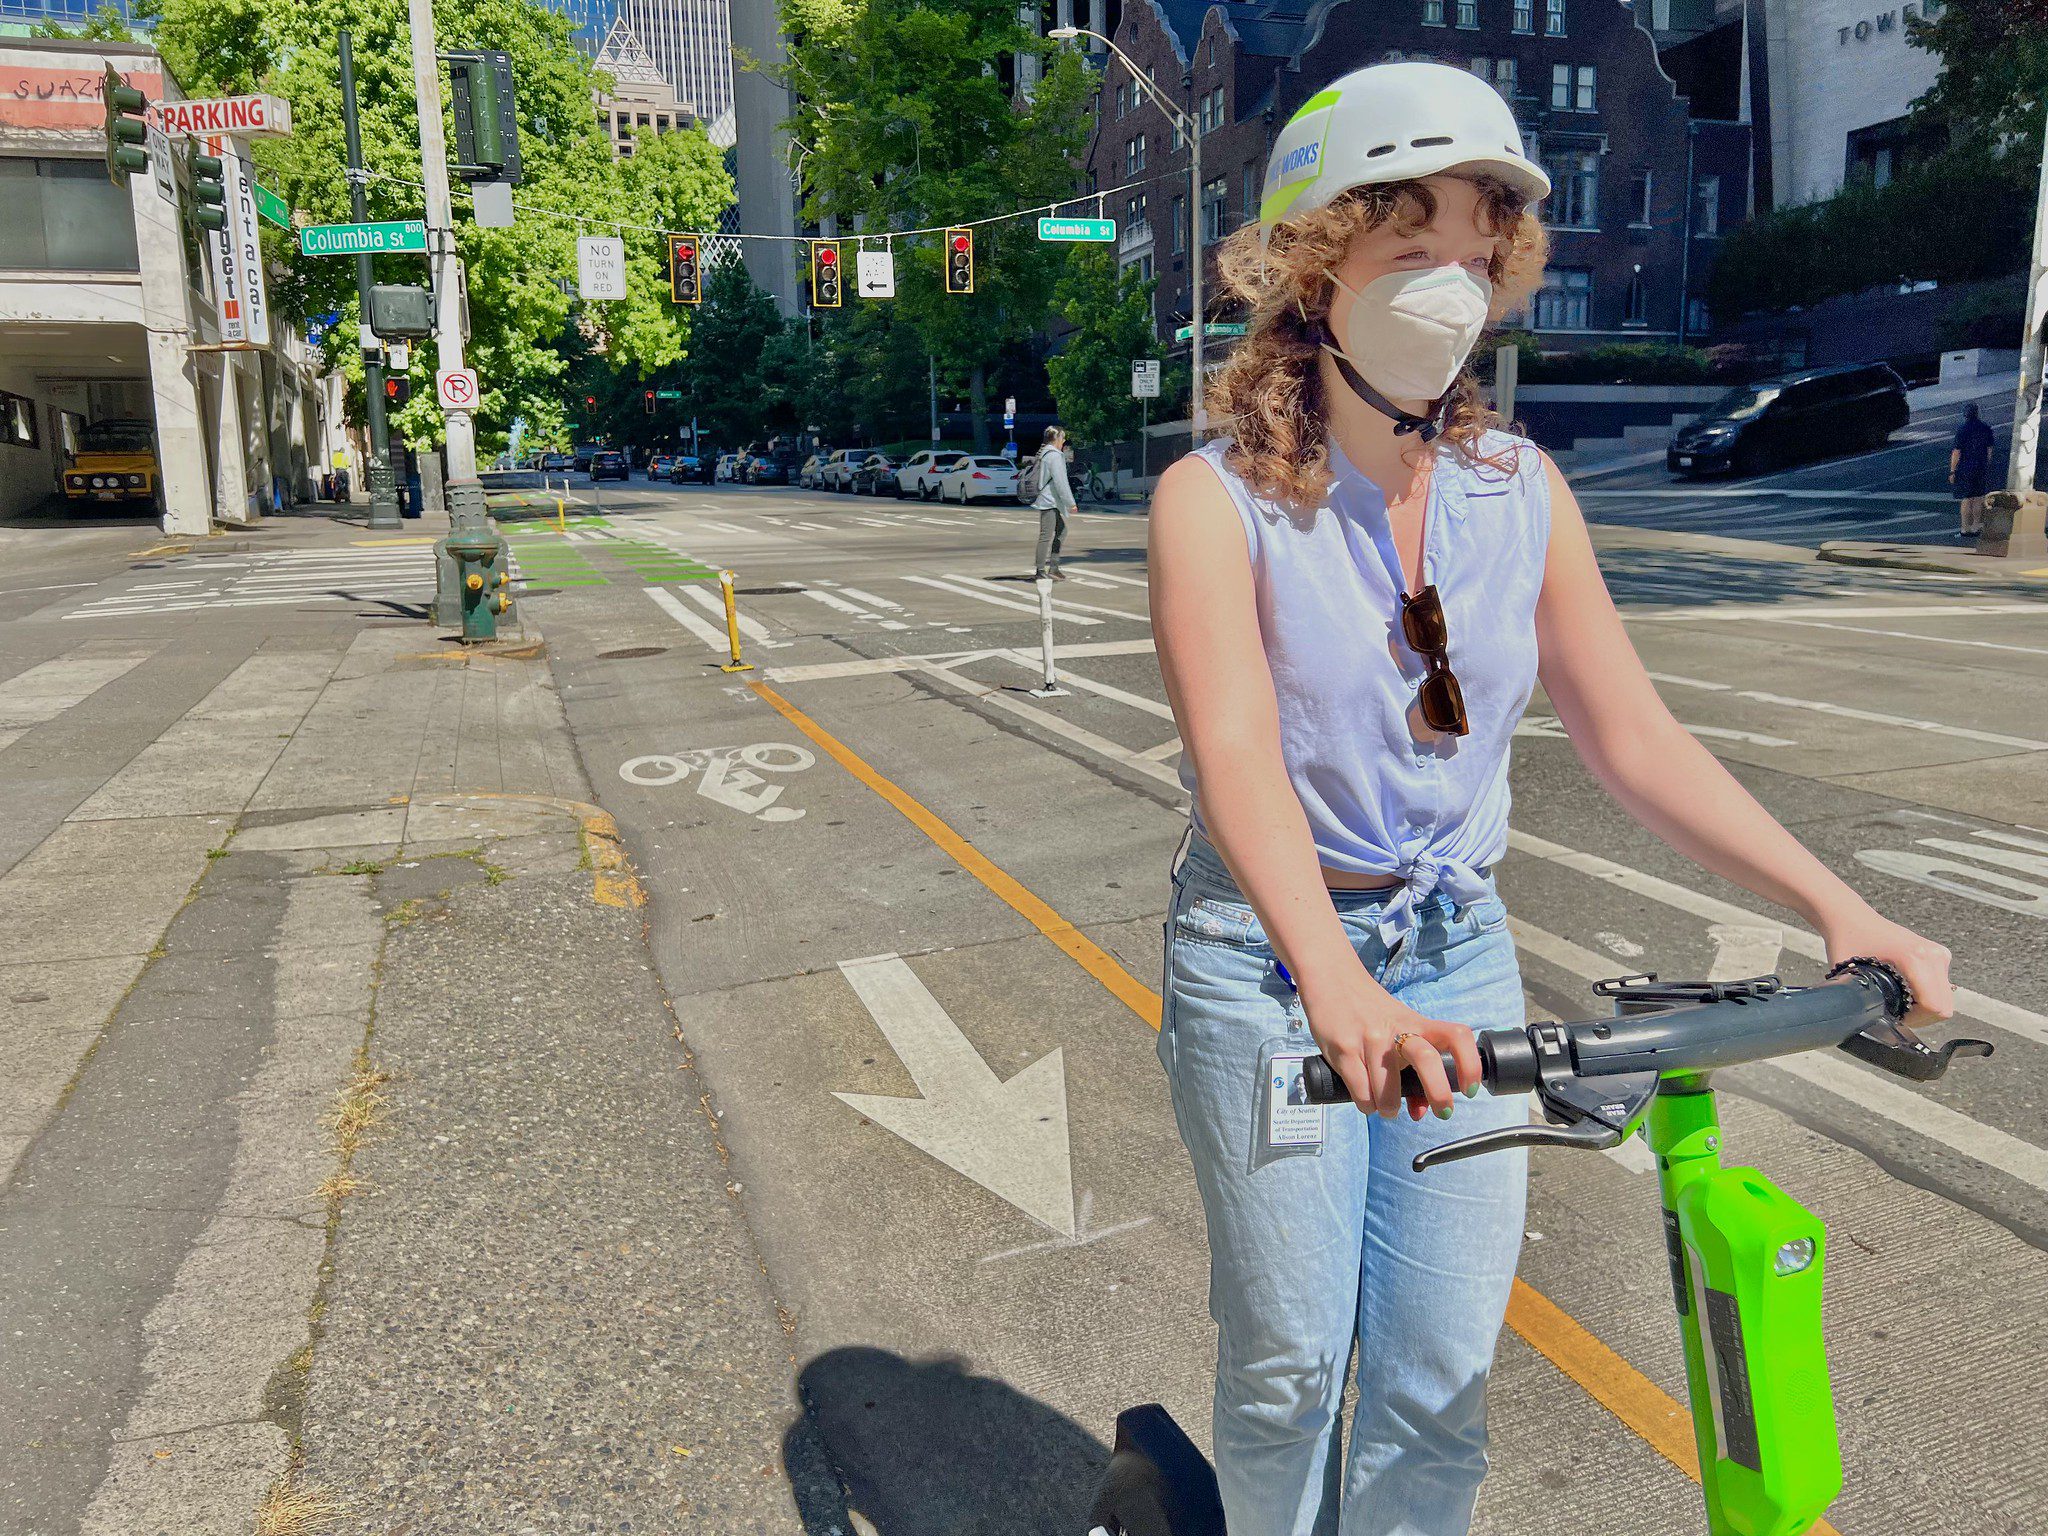 A scooter share rider travels along a protected bike lane on 4th Ave in downtown Seattle. The rider is wearing a white helmet and a mask, riding a green scooter down the protected bike lane.